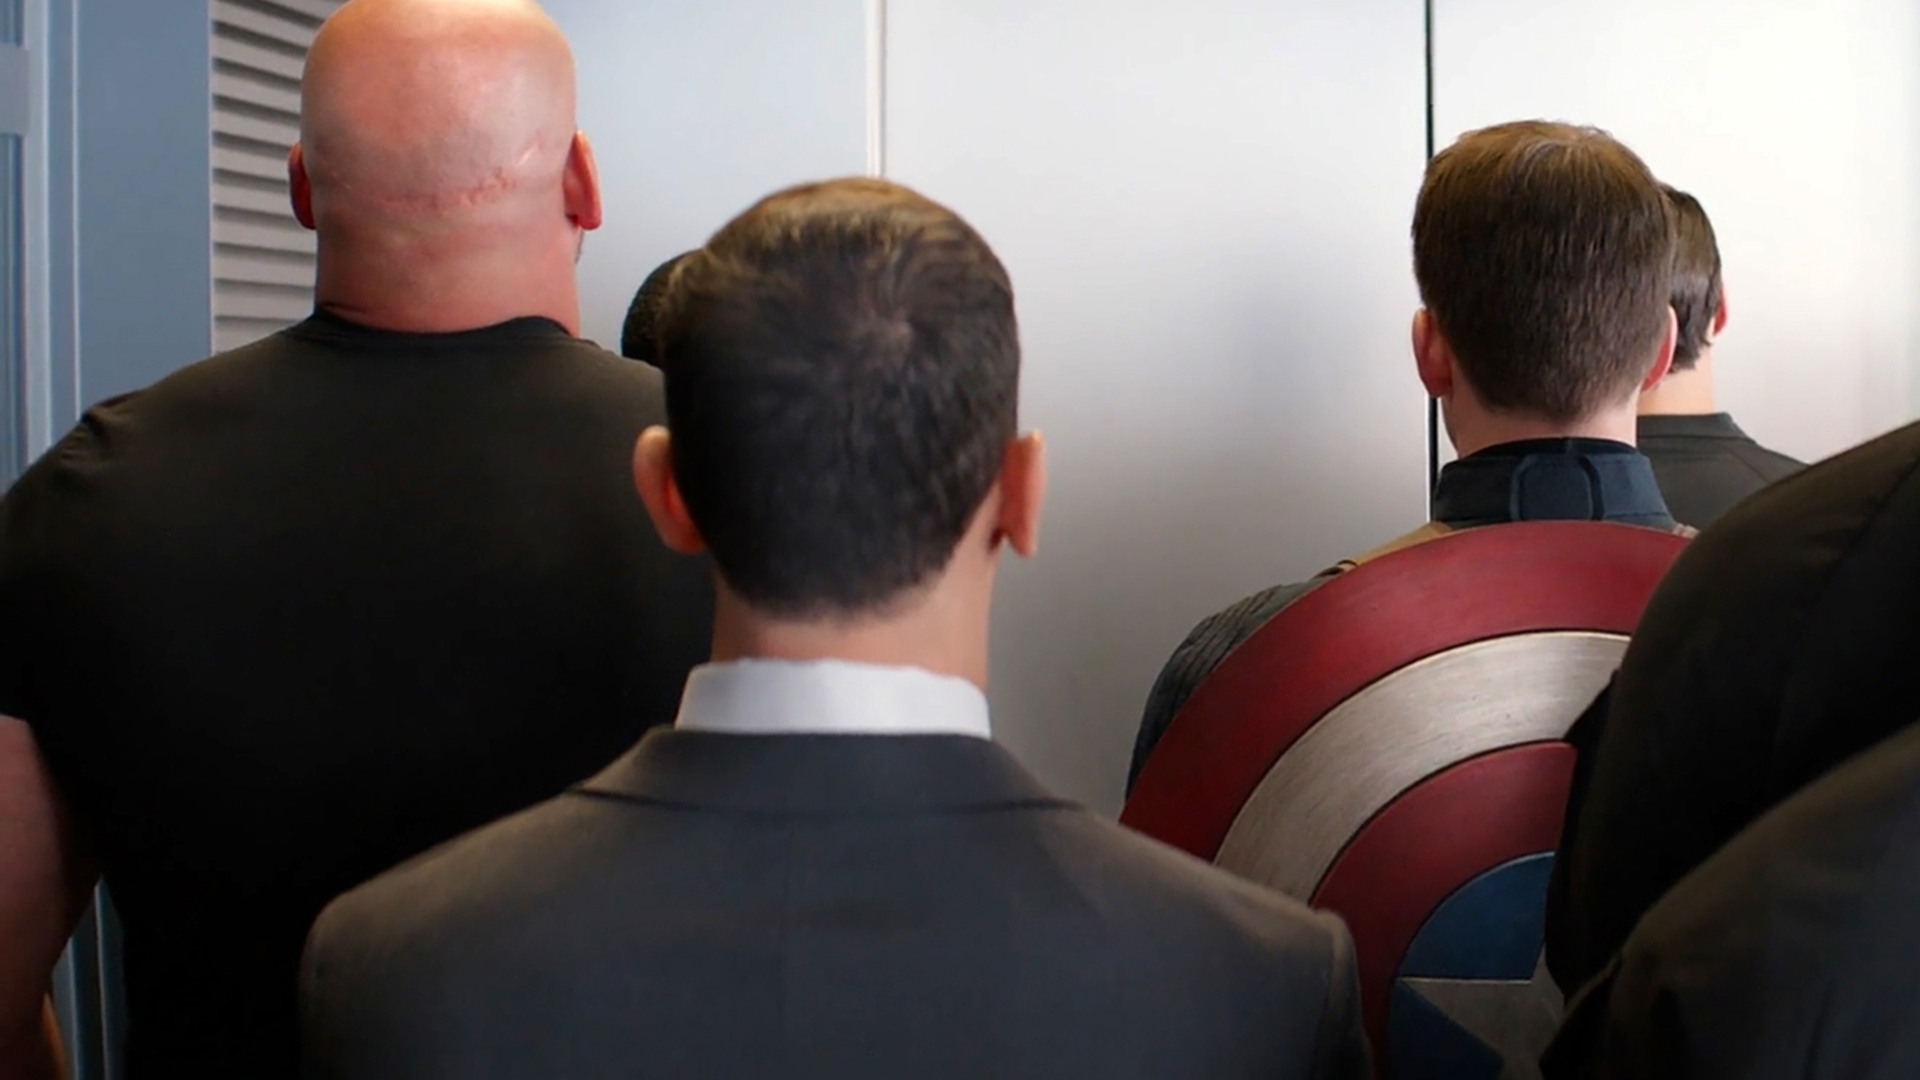 Captain America elevator scene. Virtual background to use on Zoom, Microsoft Teams, Skype, Google Meet, WebEx or any other compatible app.